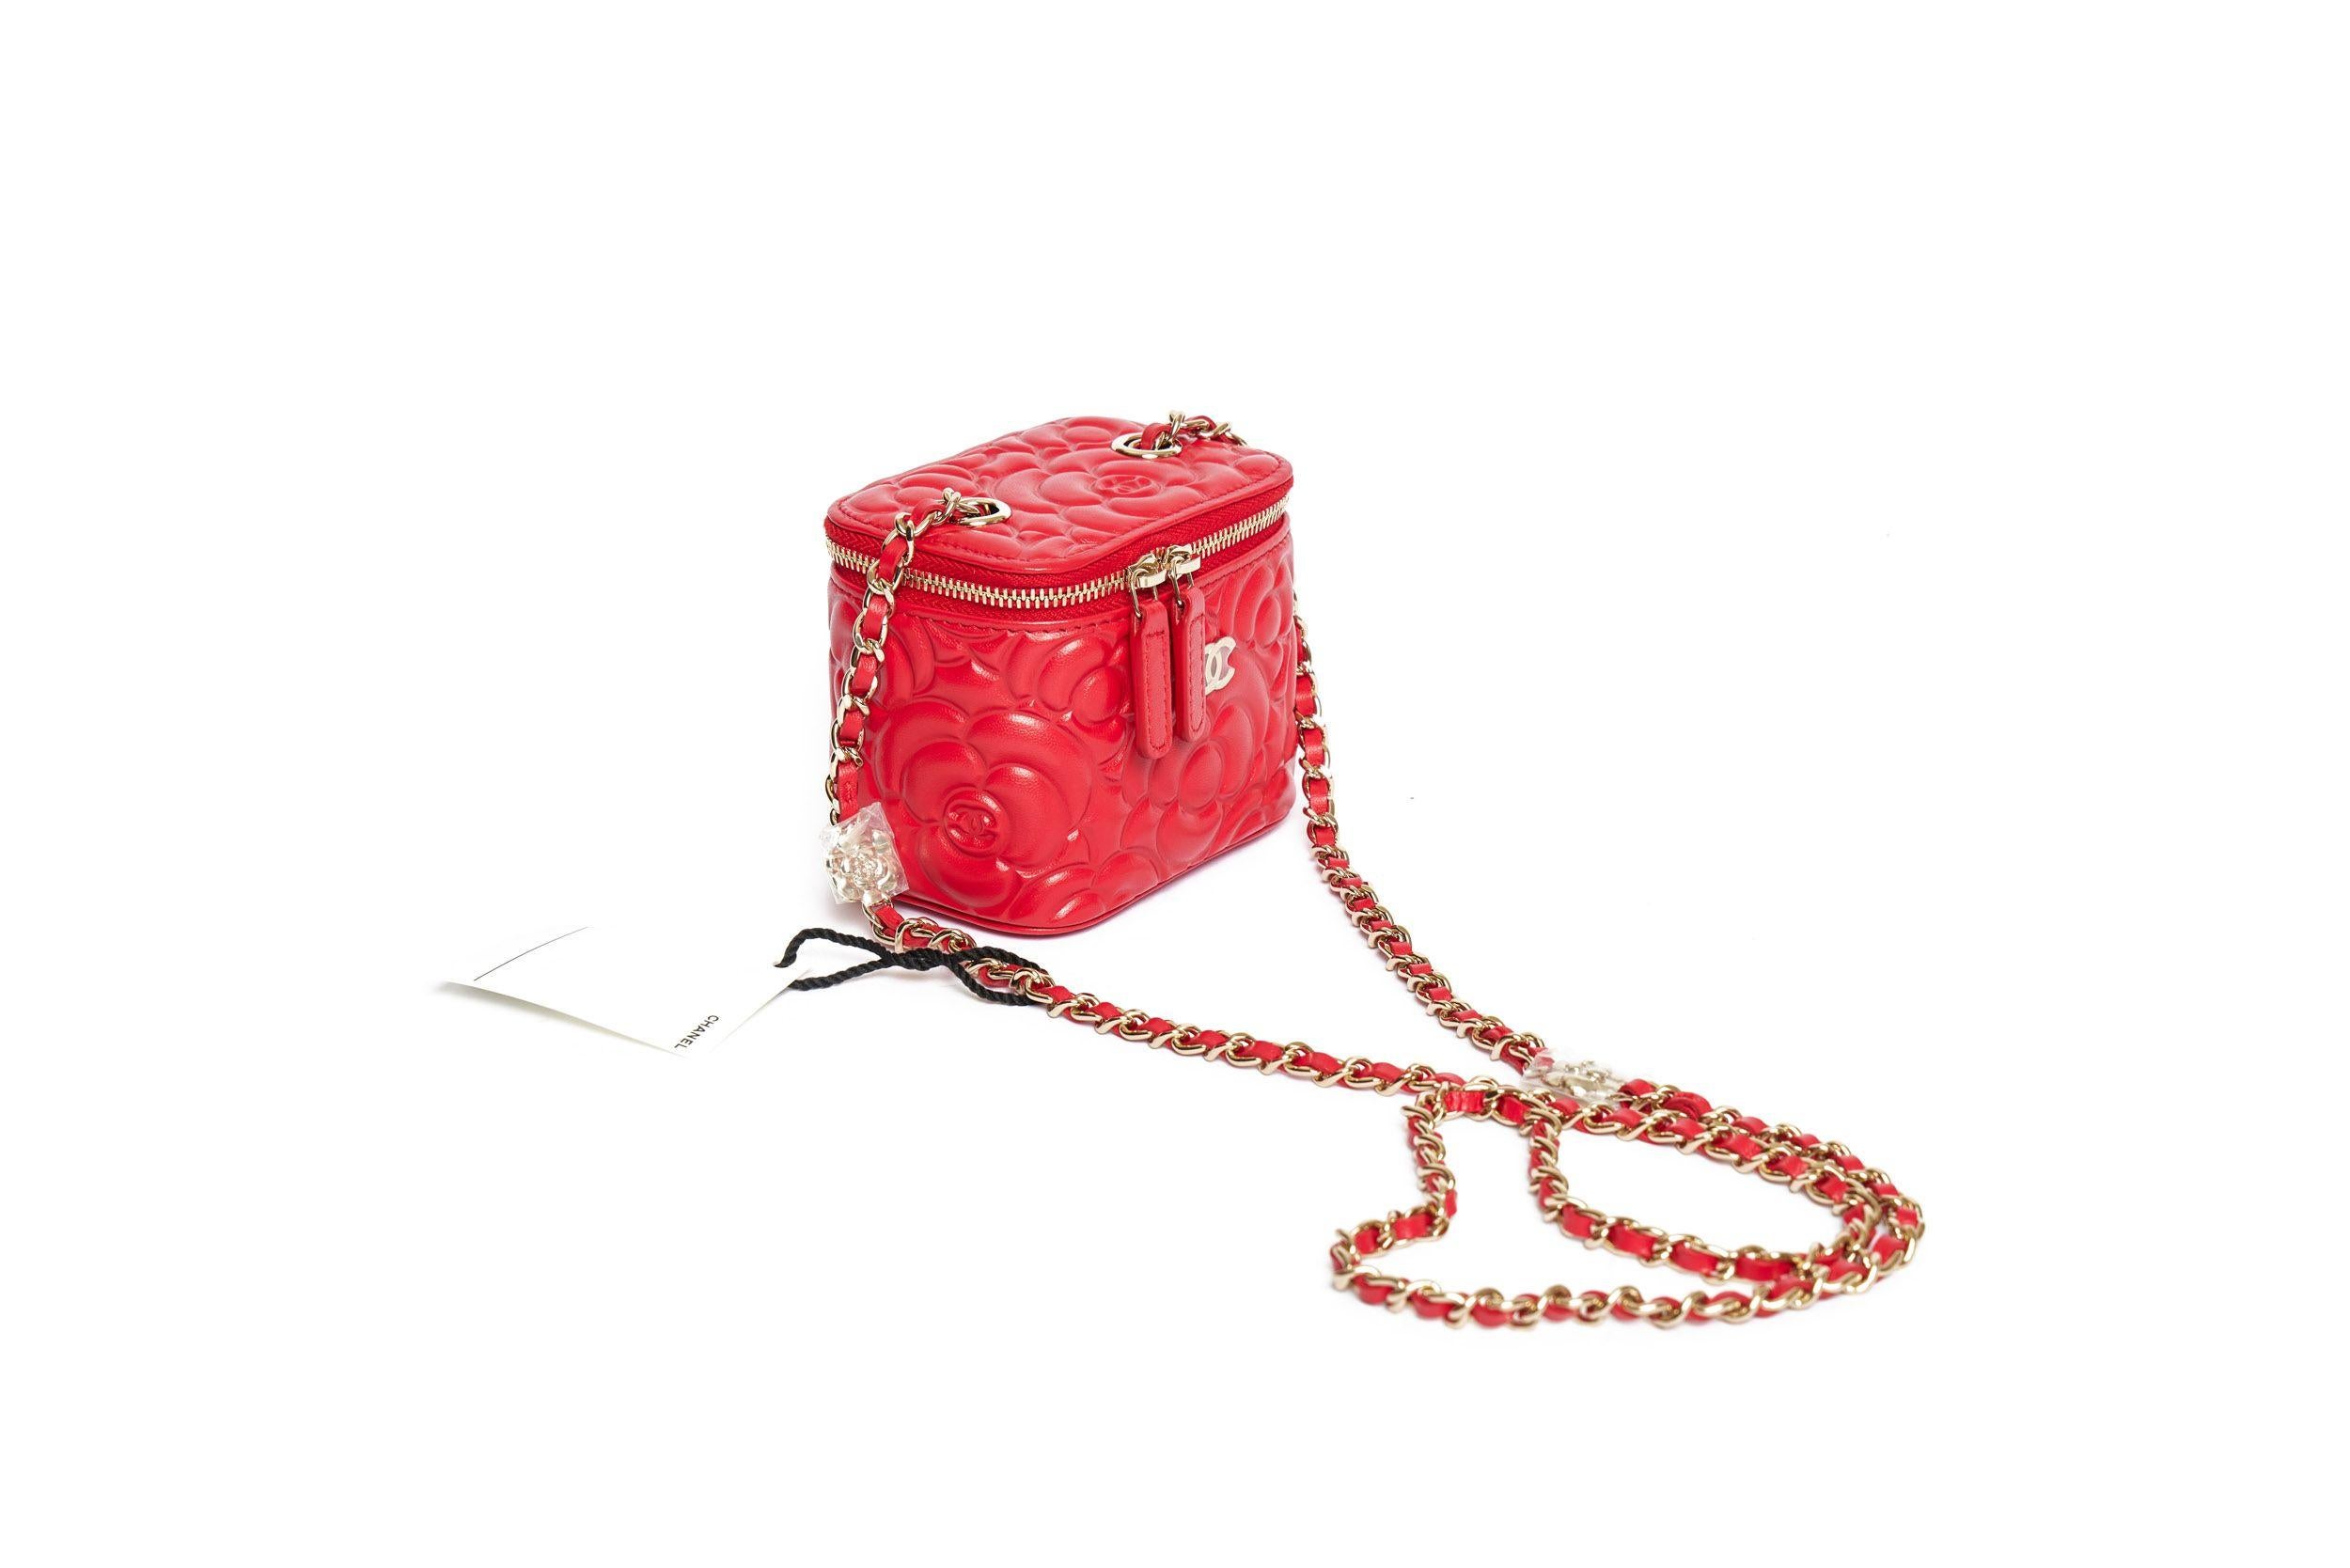 Chanel Mini Vanity Case bag in red with embroidered Camellia pattern. This bag is brand new so that the small flowers on the shoulder leather-threaded gold chain (drop 22’) are still covered in plastic. The bag closes with a zip and in front is the